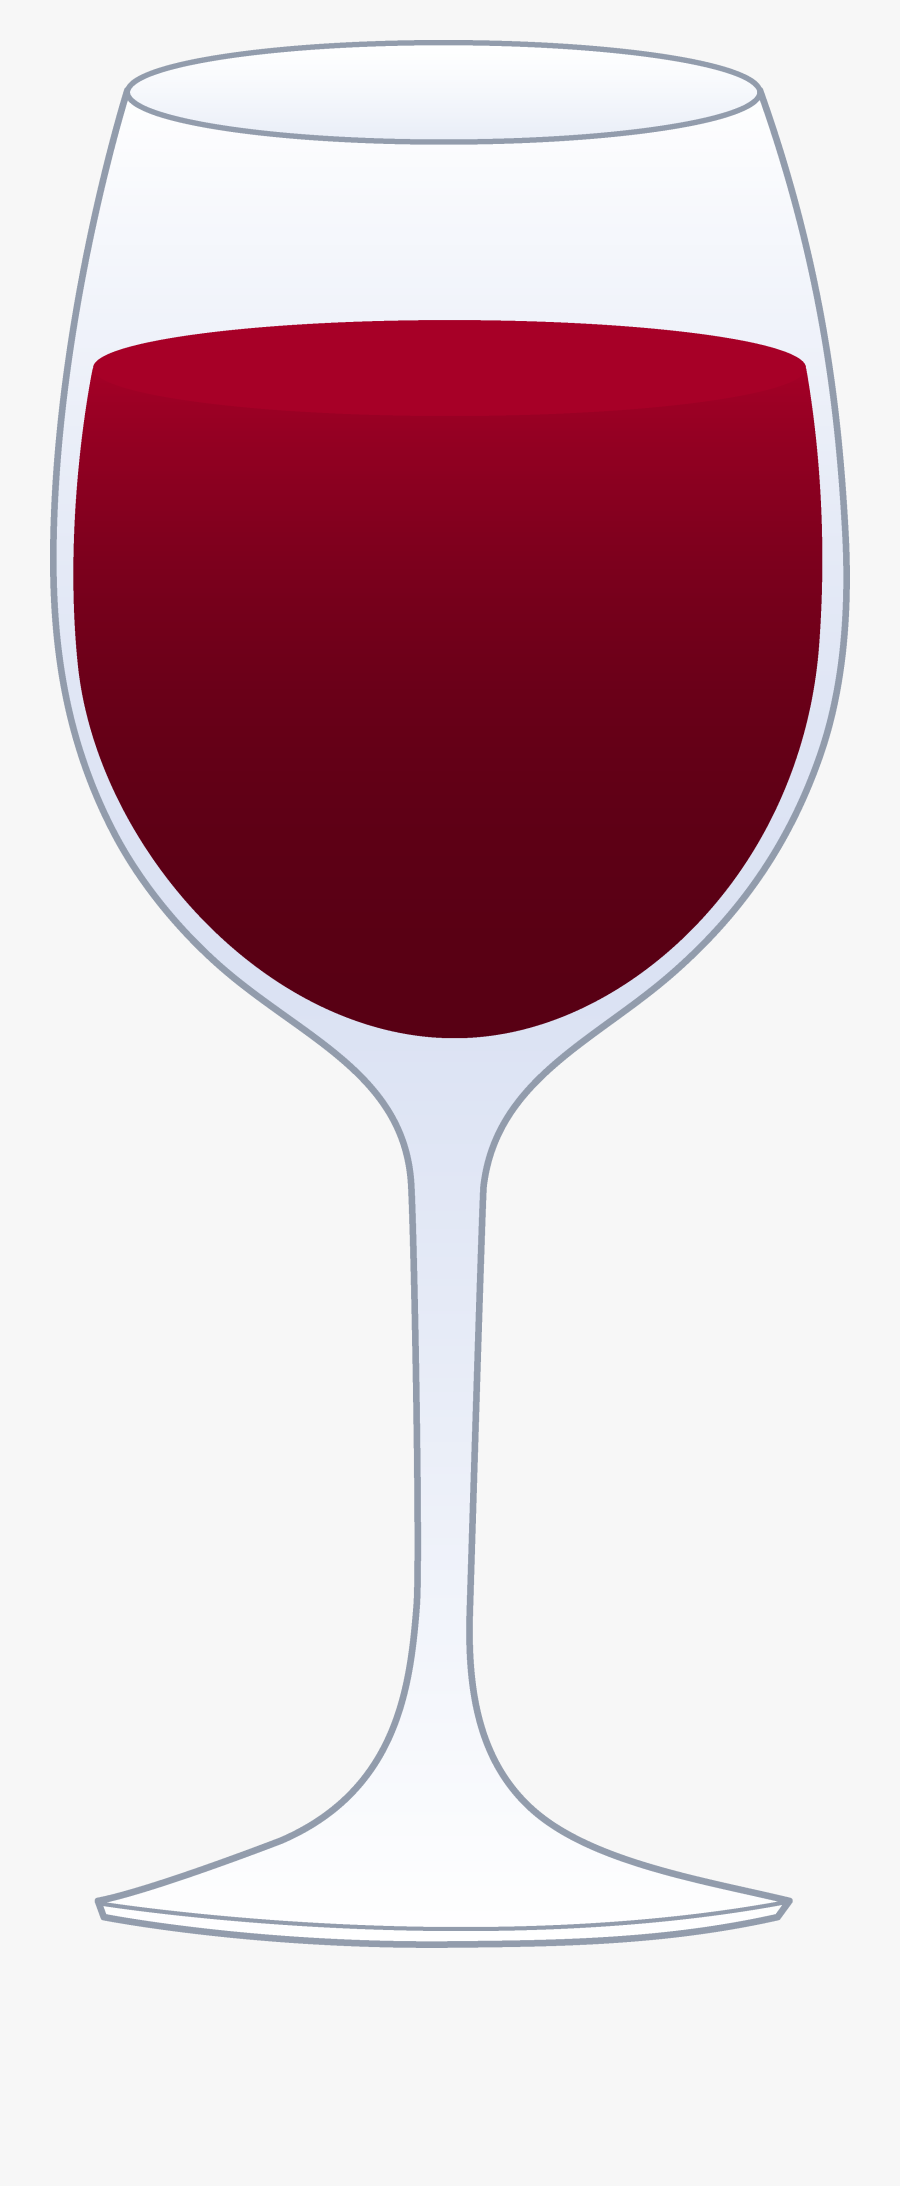 Thumb Image - Glass Of Wine Clipart, Transparent Clipart